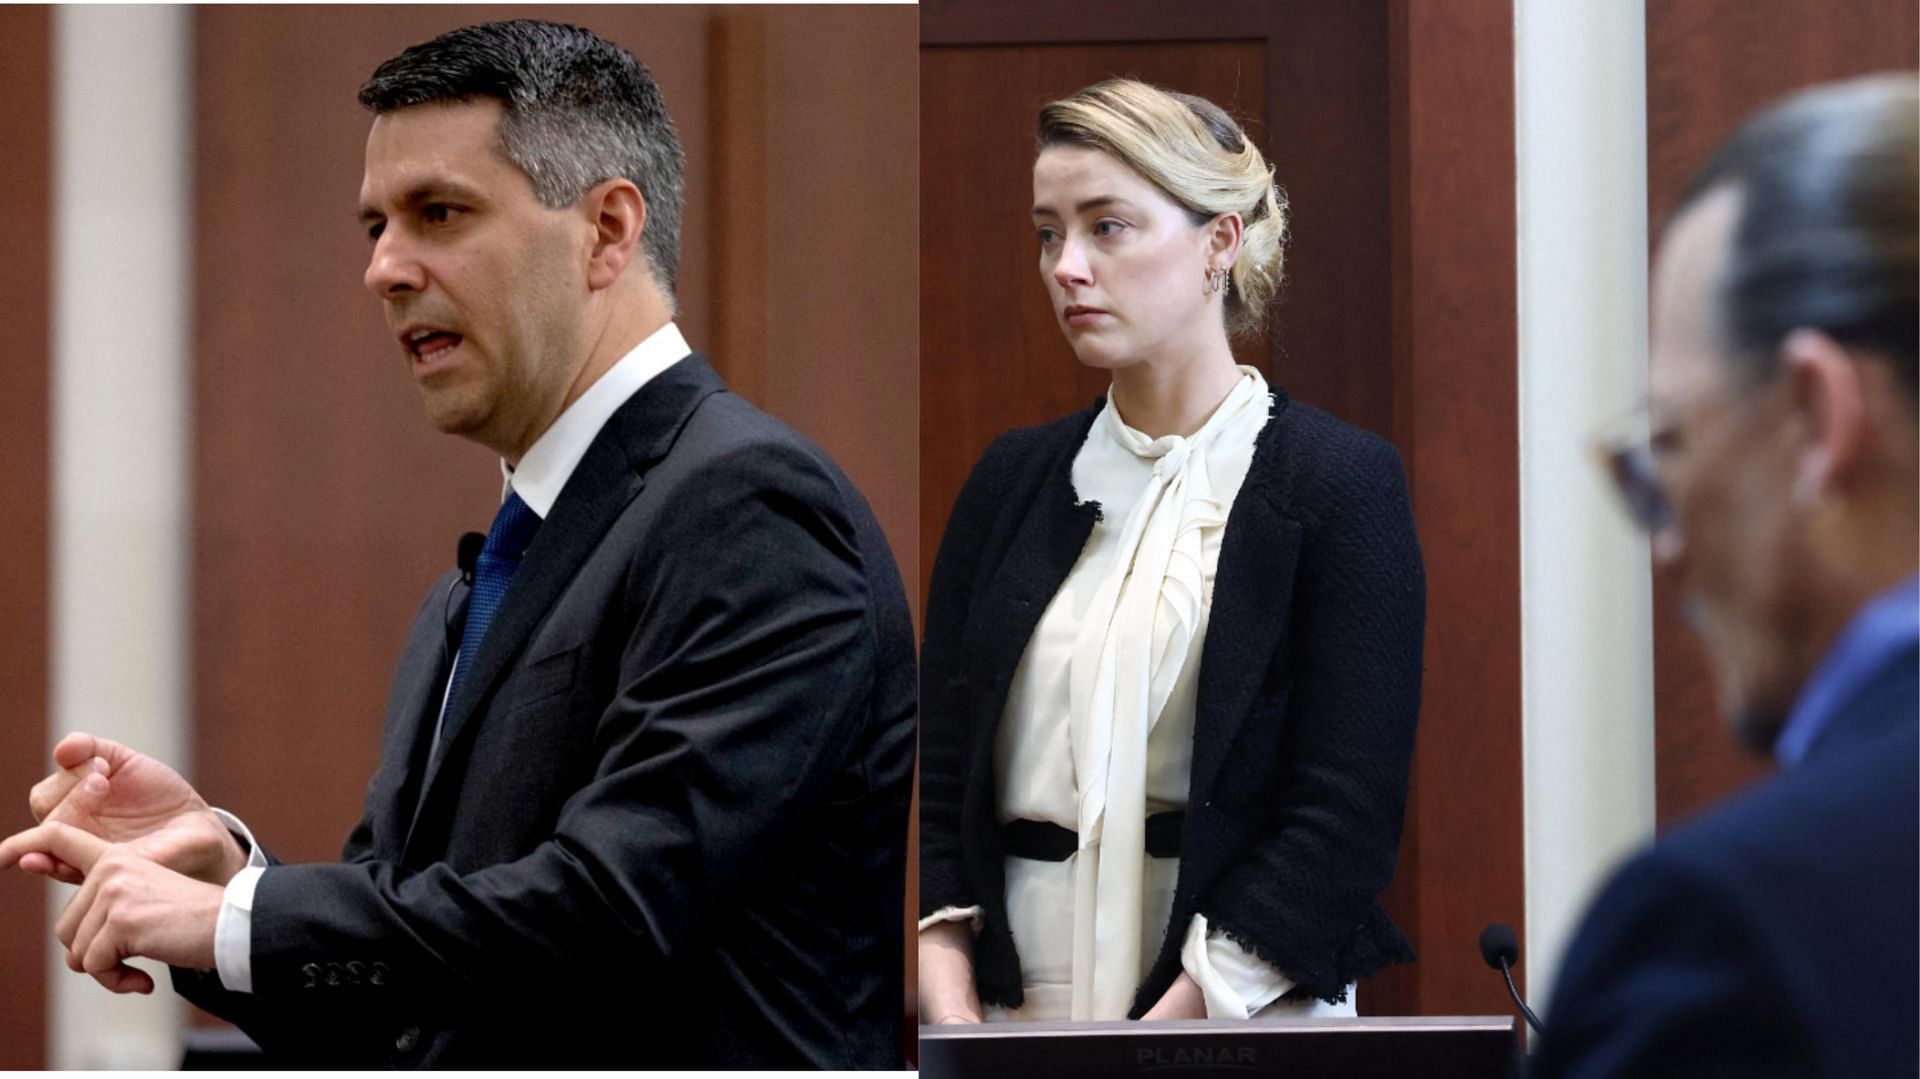 Ben Rottenborn, Amber Heard, and Johnny Depp in the trial (Image via Brendan Smialowski, and Jim Lo Scalzo/AFP/Getty Images)